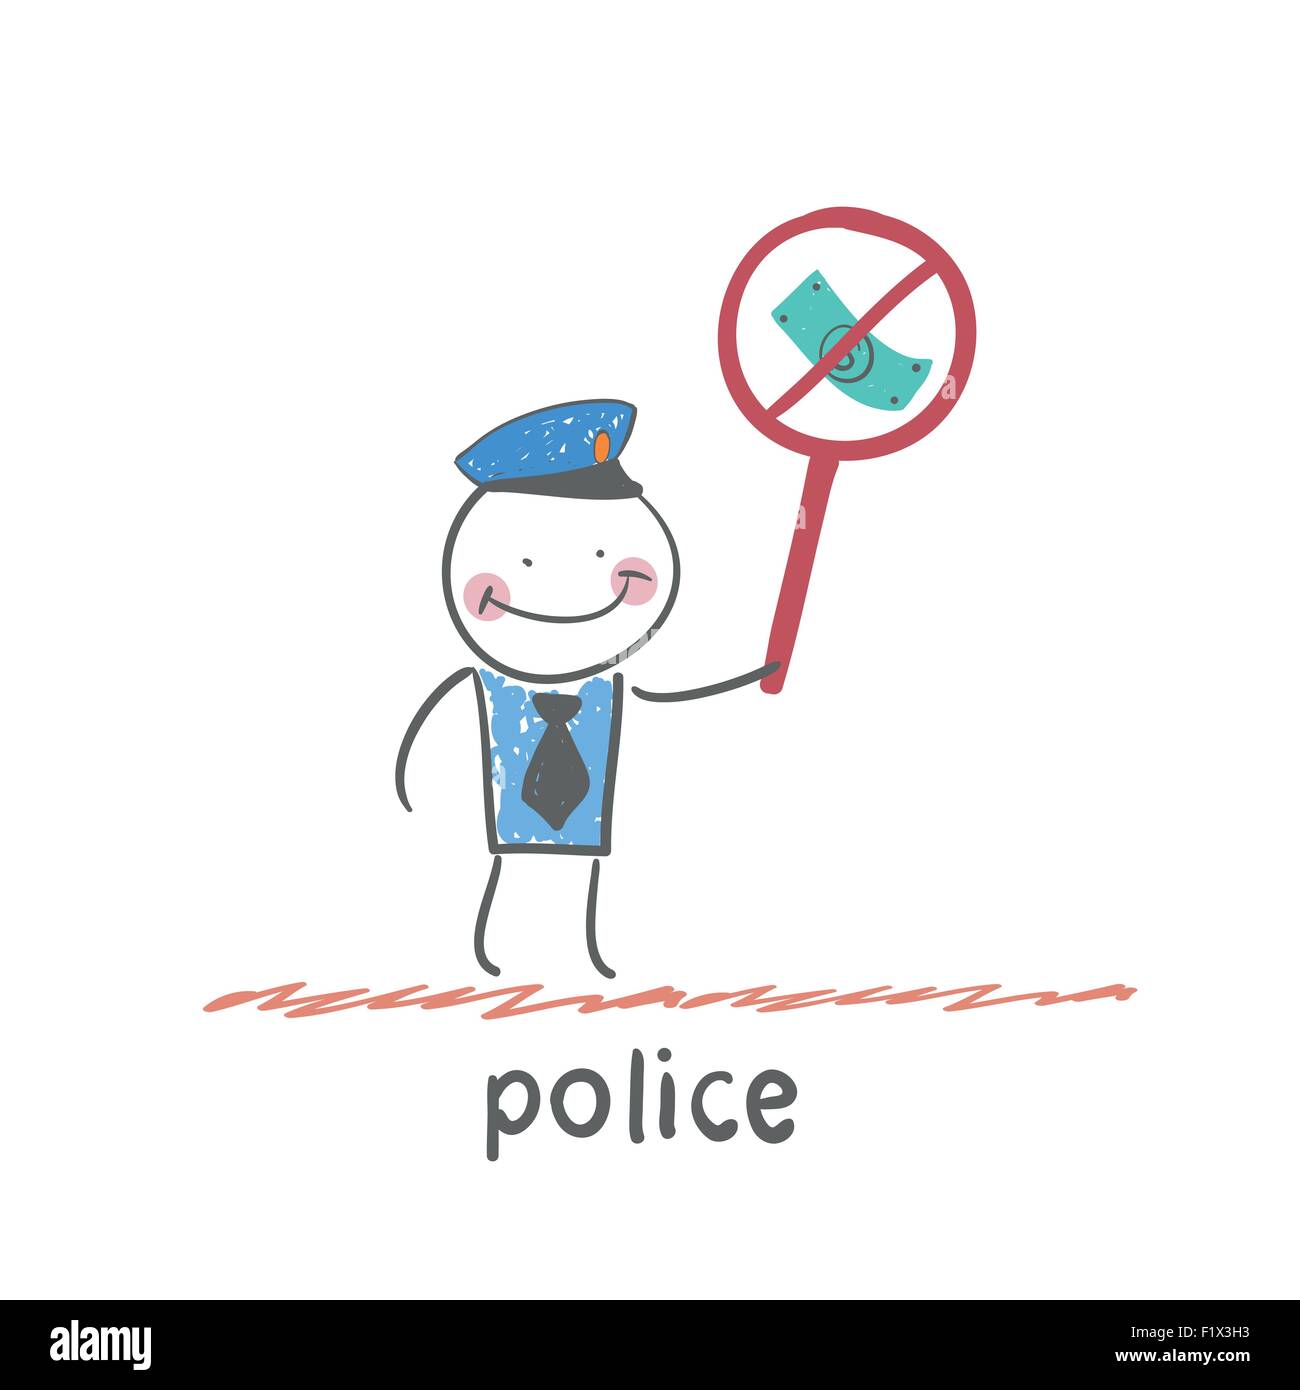 police. Fun cartoon style illustration. The situation of life. Stock Vector